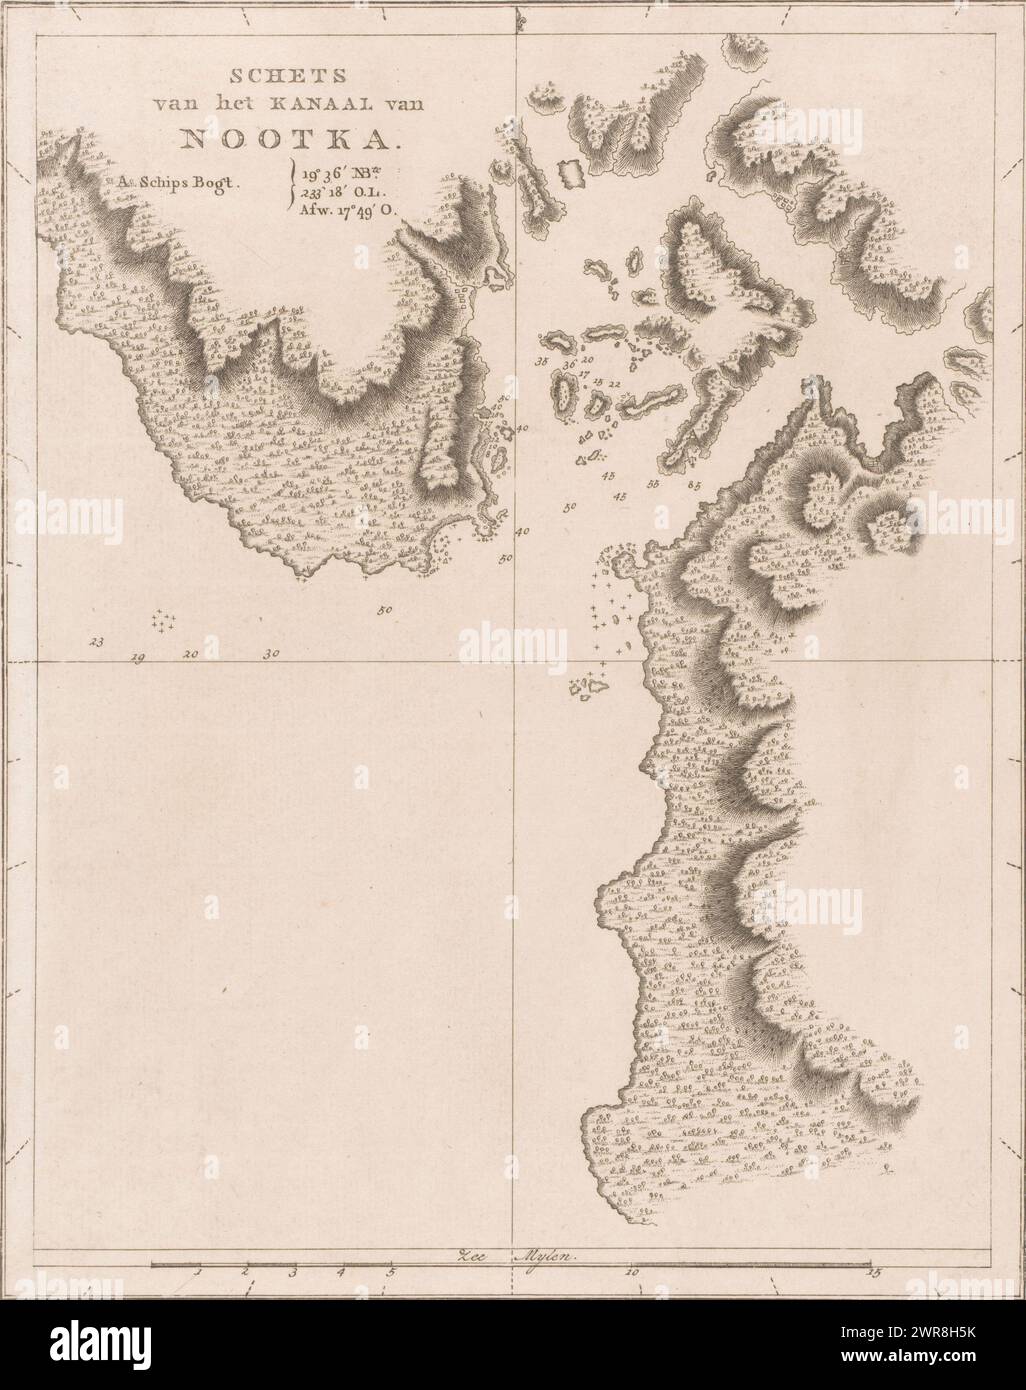 Sketch of the Nootka Canal, Sketch of the Nootka Canal (title on object), Sketchy map of the Nootka Canal with coordinates and scale. At the top right it says: 'N XXXIX**'., print maker: anonymous, 1680 - 1725, paper, etching, height 284 mm × width 230 mm, print Stock Photo